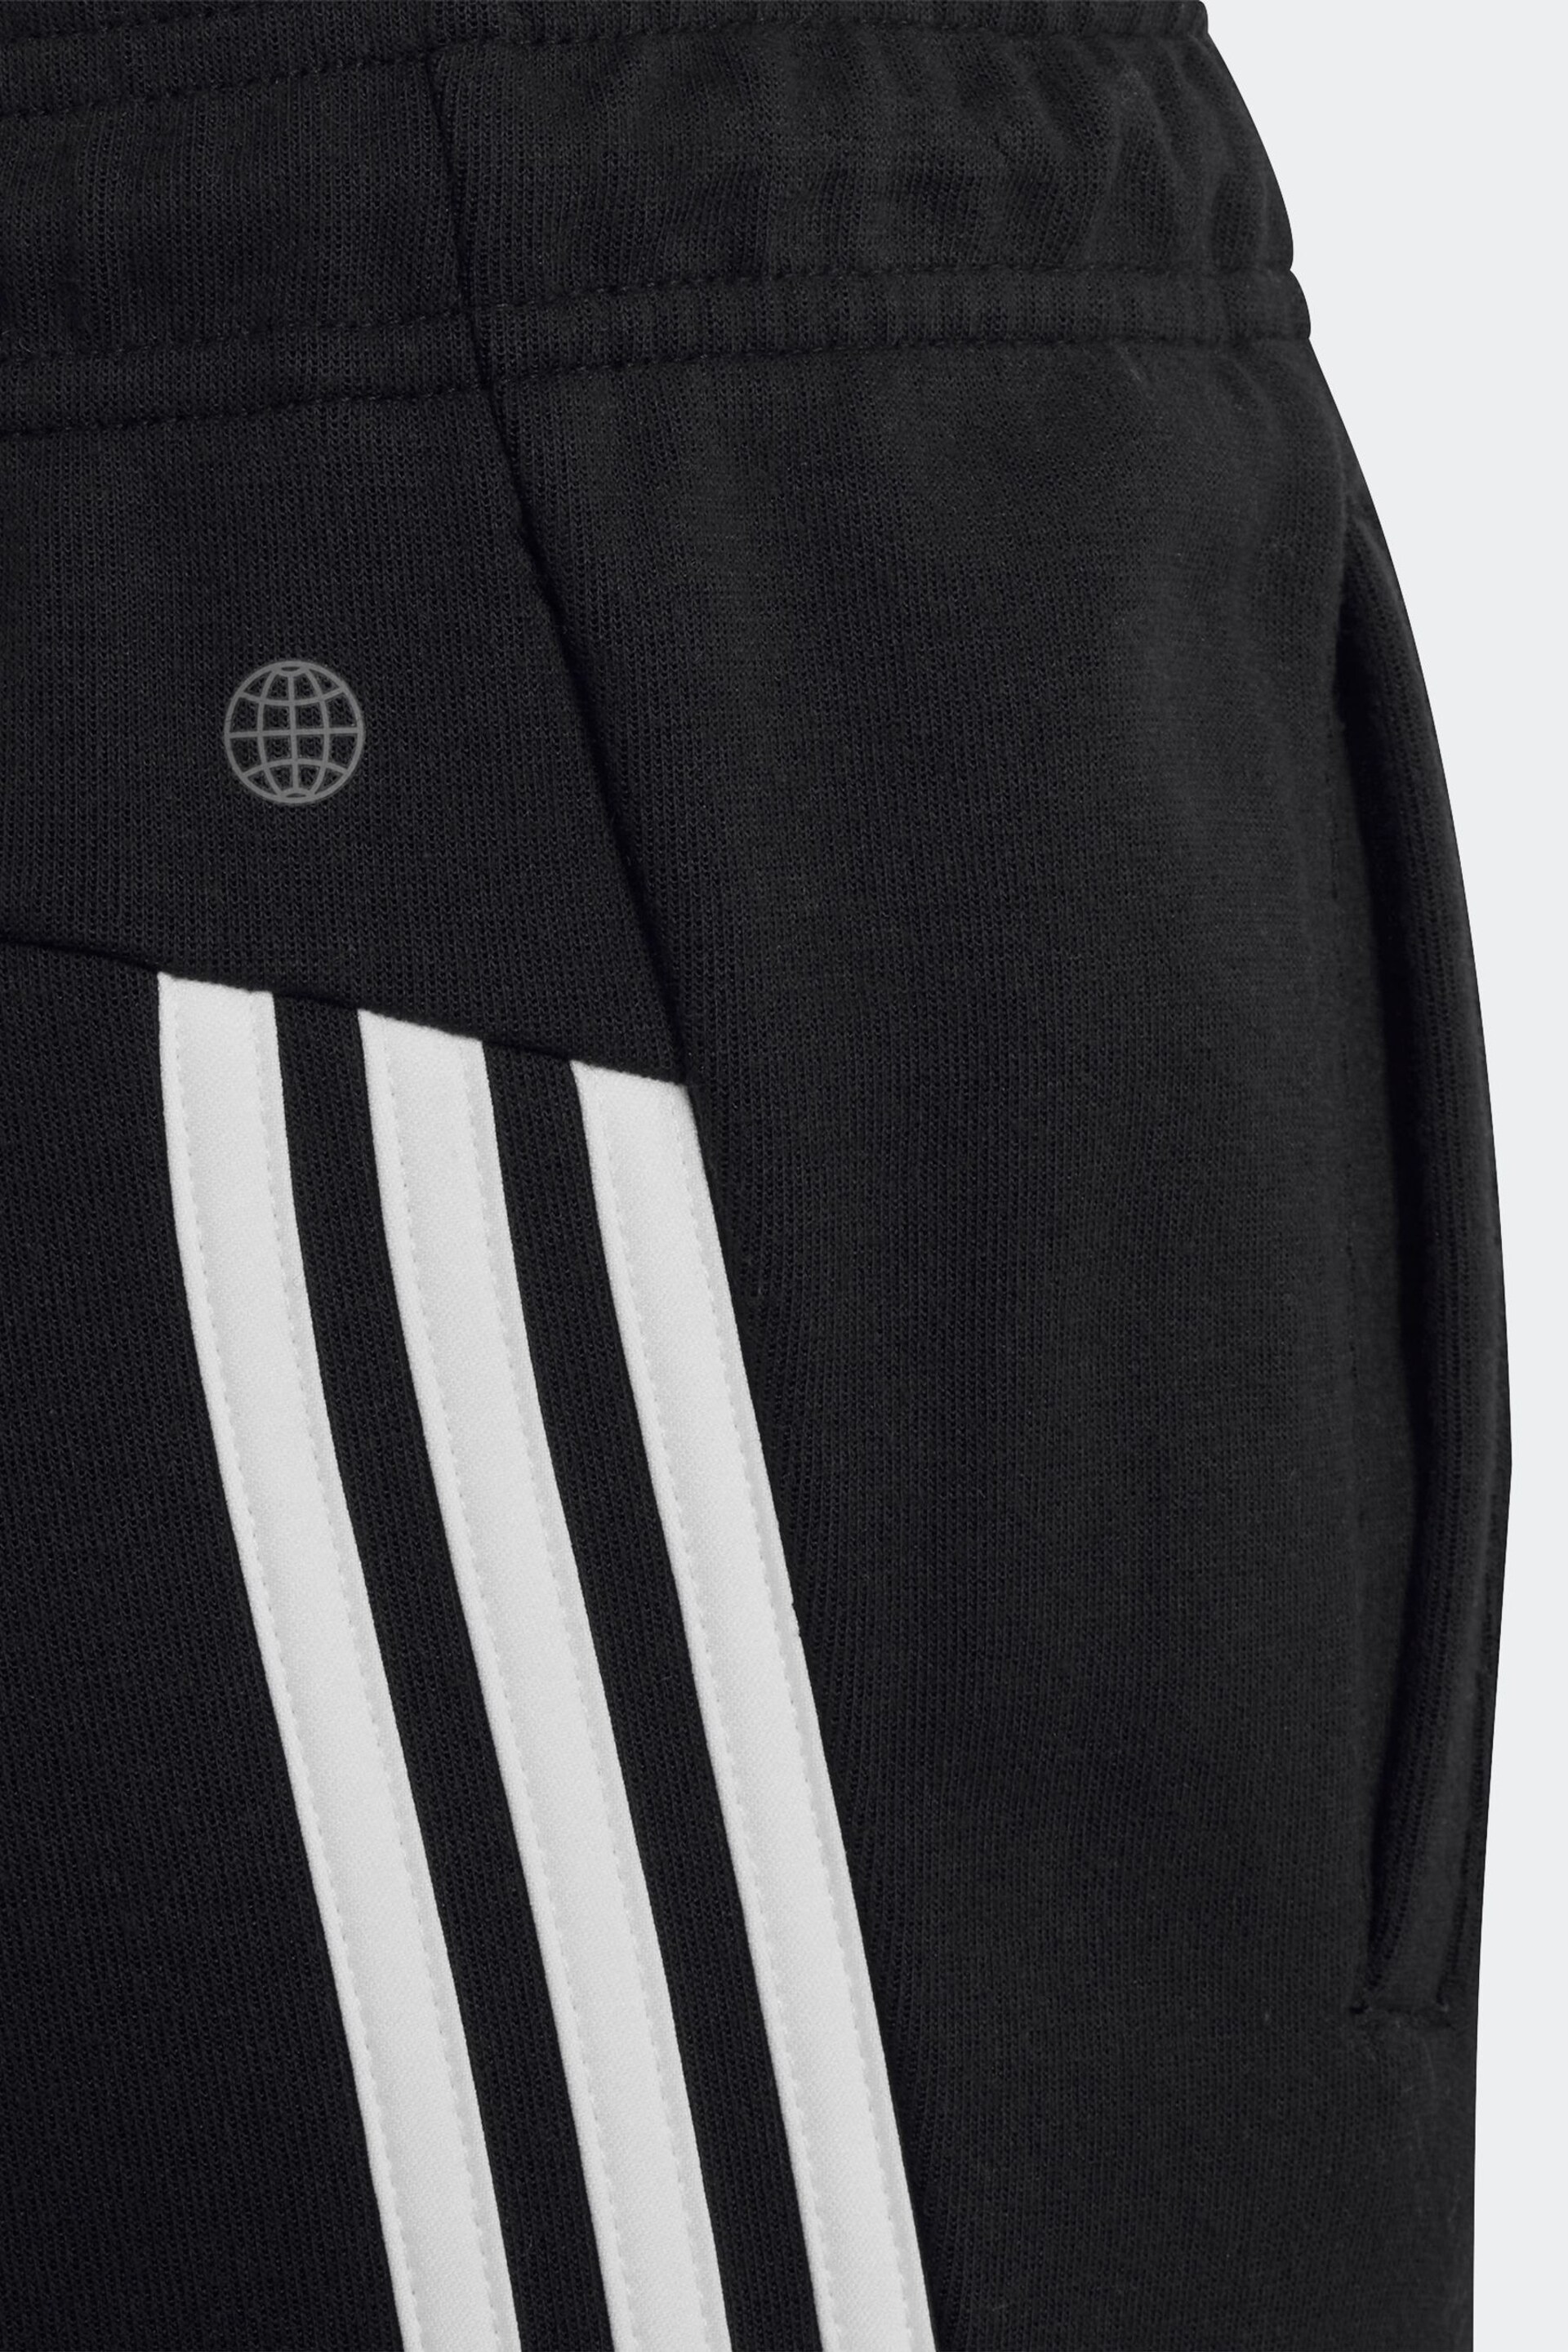 adidas Black Sportswear Future Icons 3-Stripes Ankle Length Joggers - Image 11 of 11